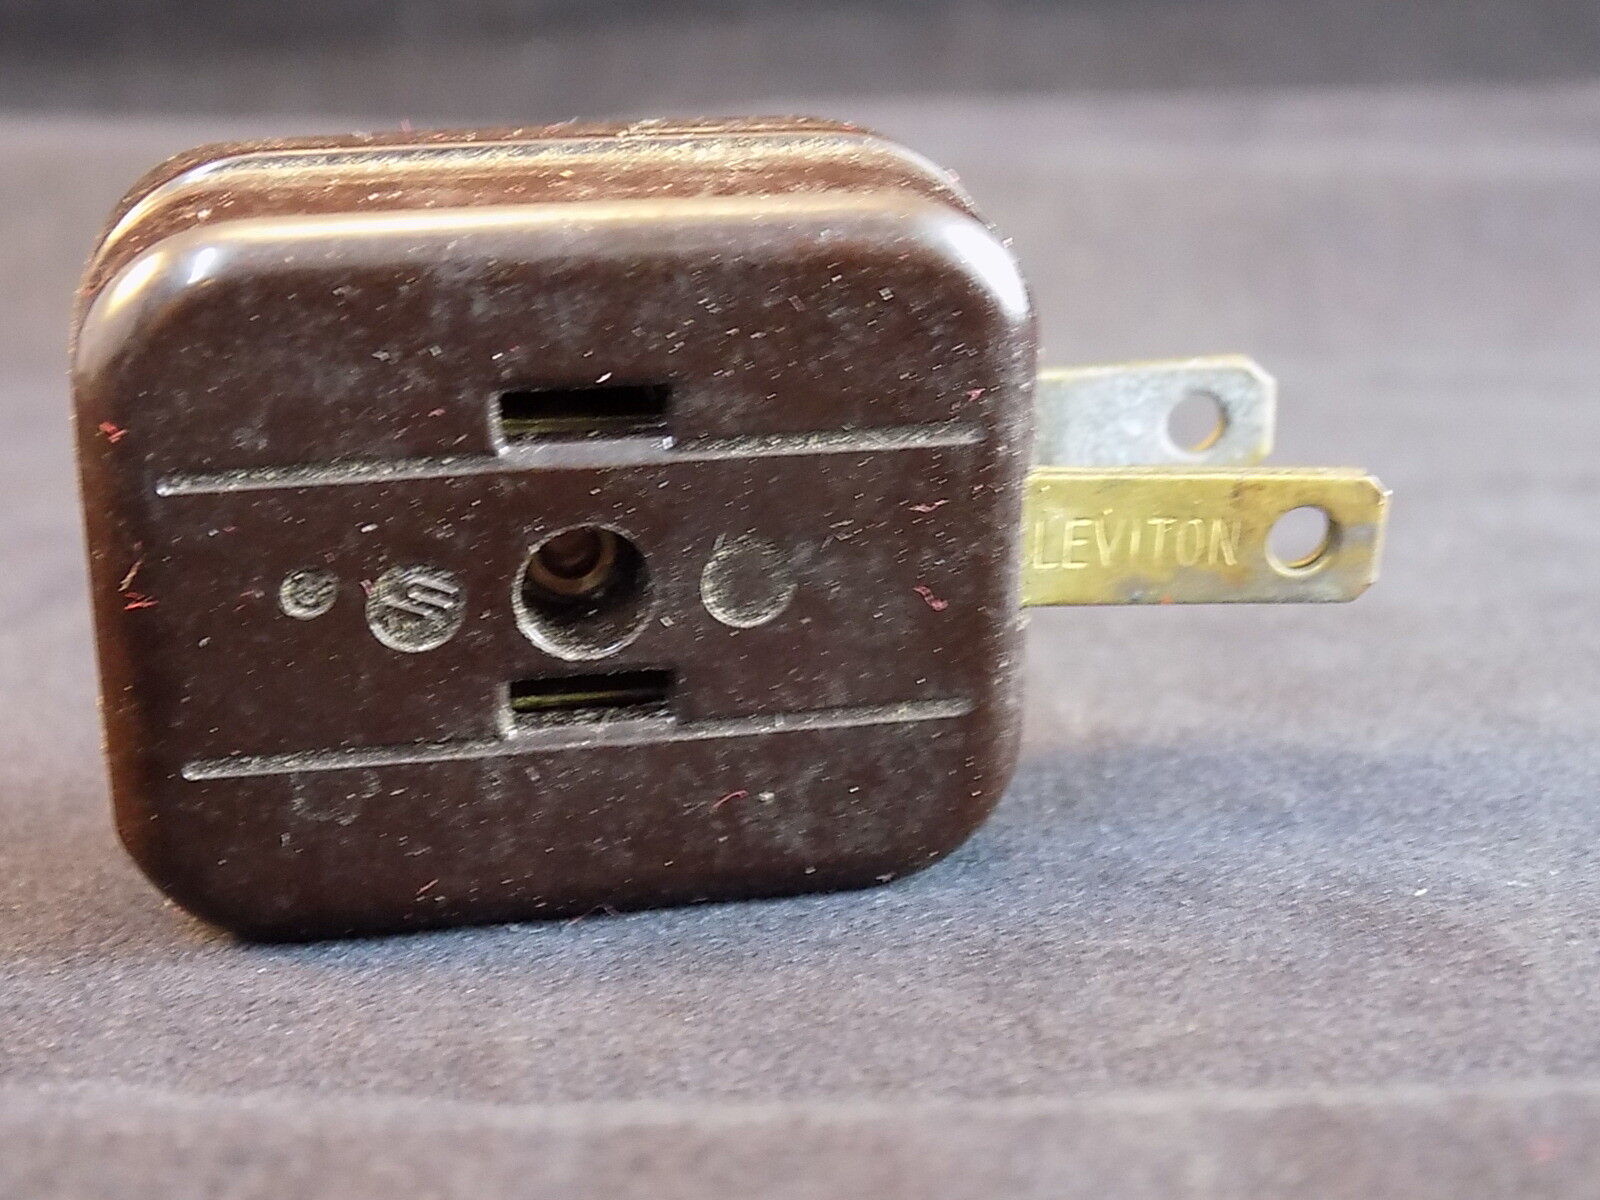 VINTAGE OUTLET MULTIPLIER LEVITON 16A- 125V 2 PRONG MALE TO 2 PRONG FEMALE X 3 - $7.91